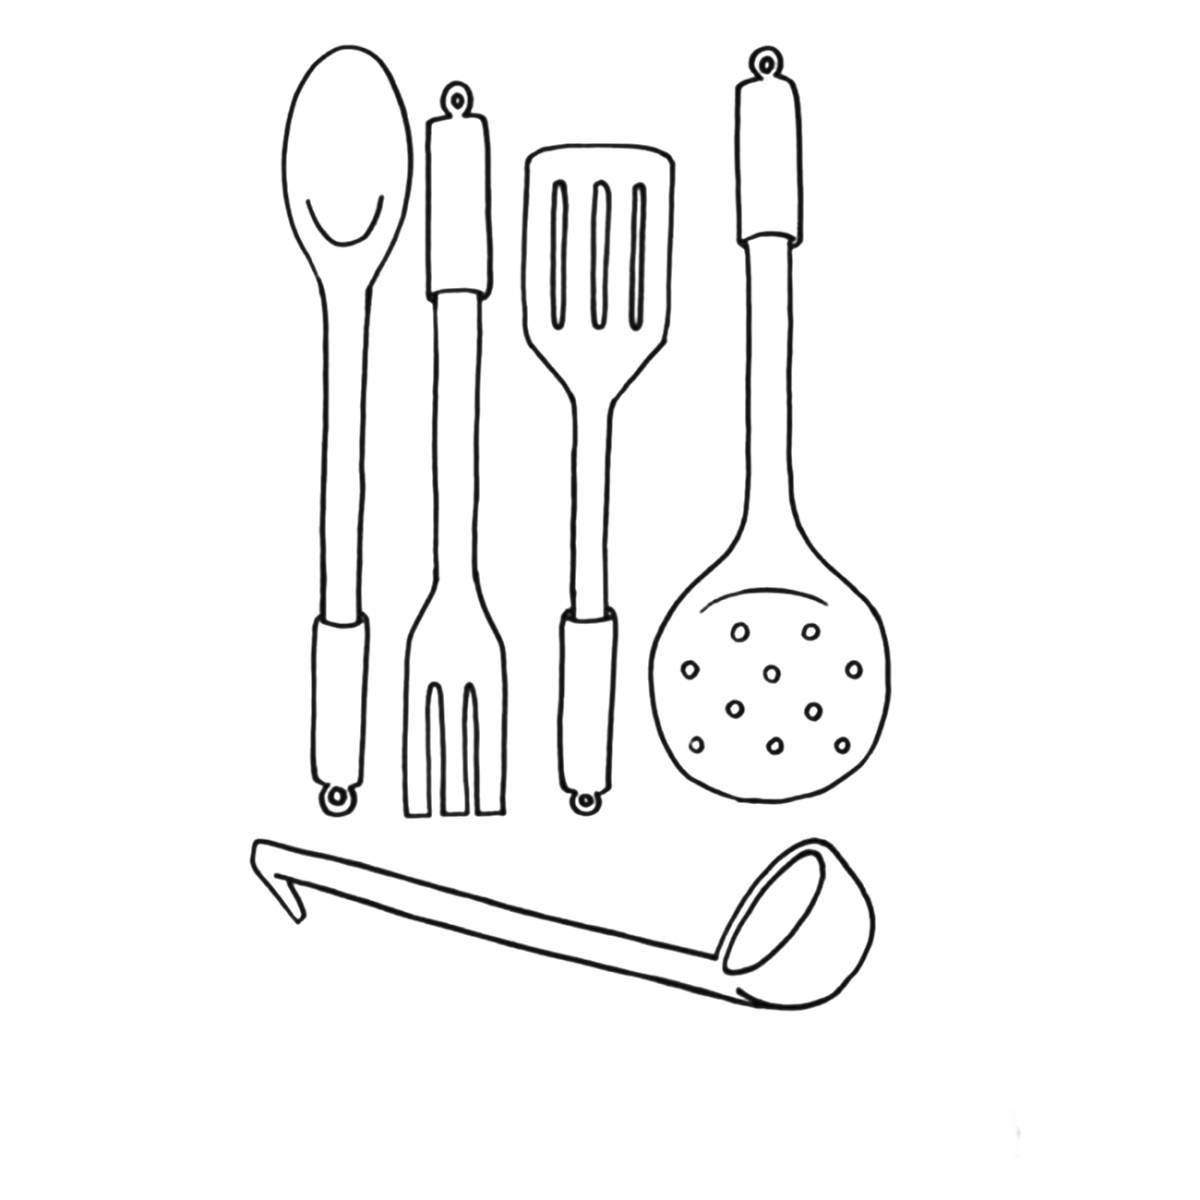 Amazing coloring pages of kitchen utensils for kids